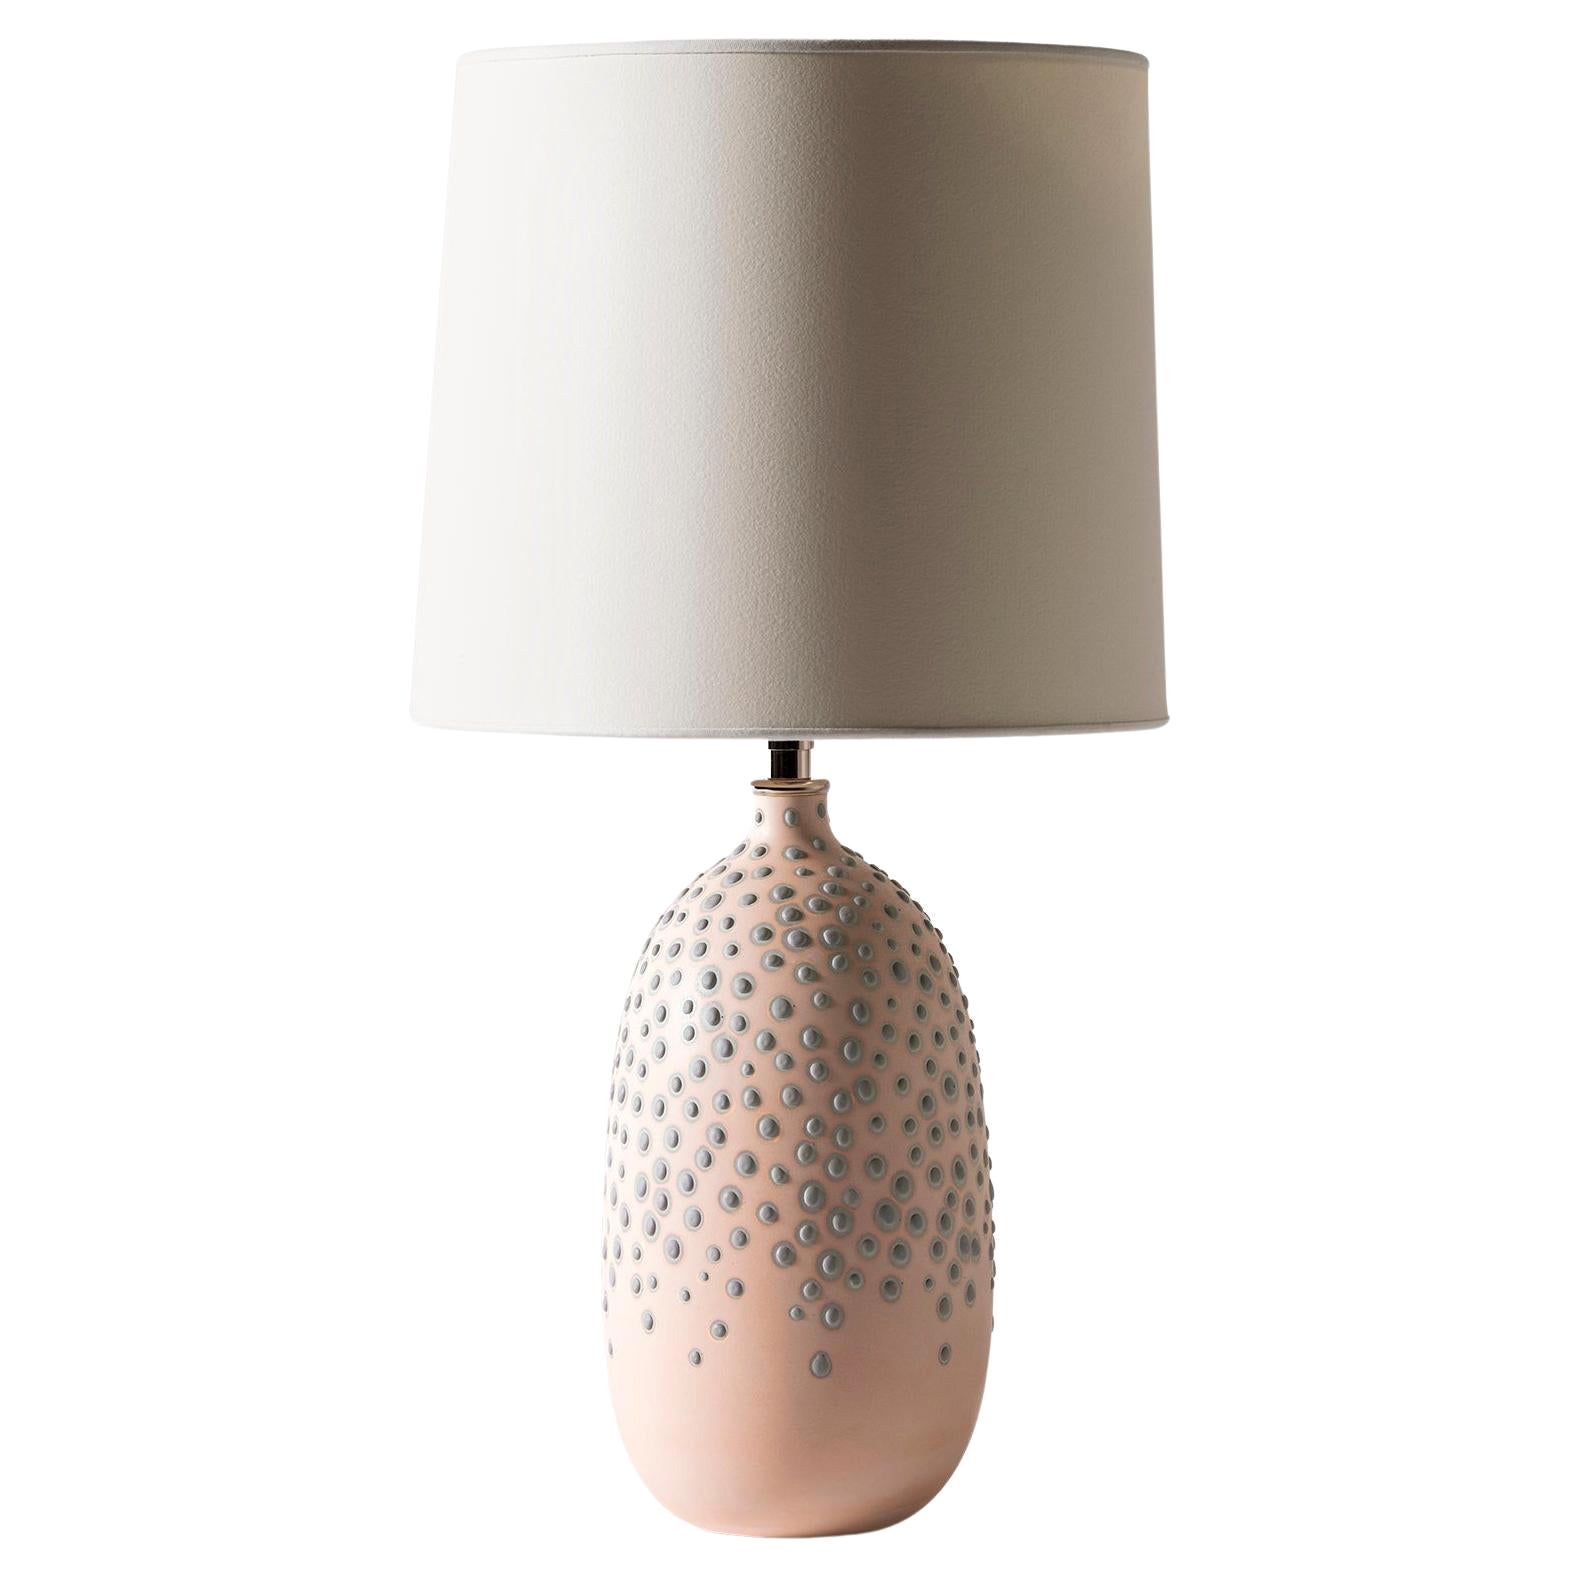 Huxley Lamp in Peach by Elyse Graham For Sale